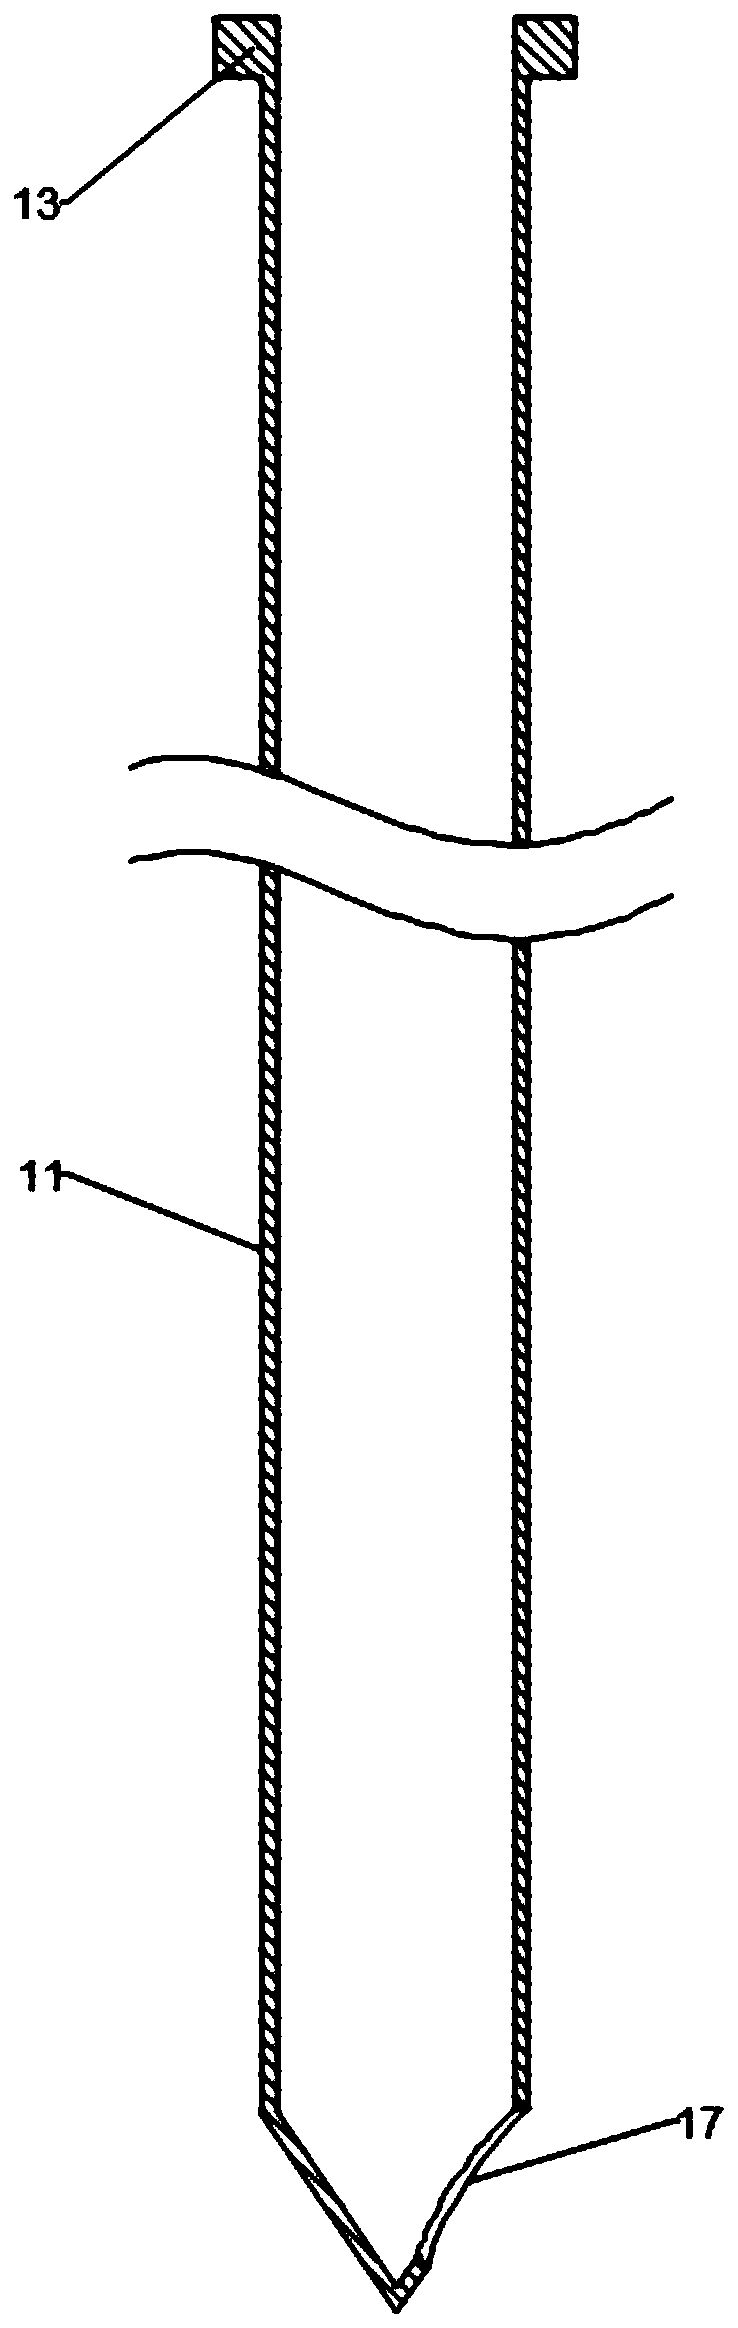 Method for performing single-needle or multi-needle puncture biopsy through laser guide